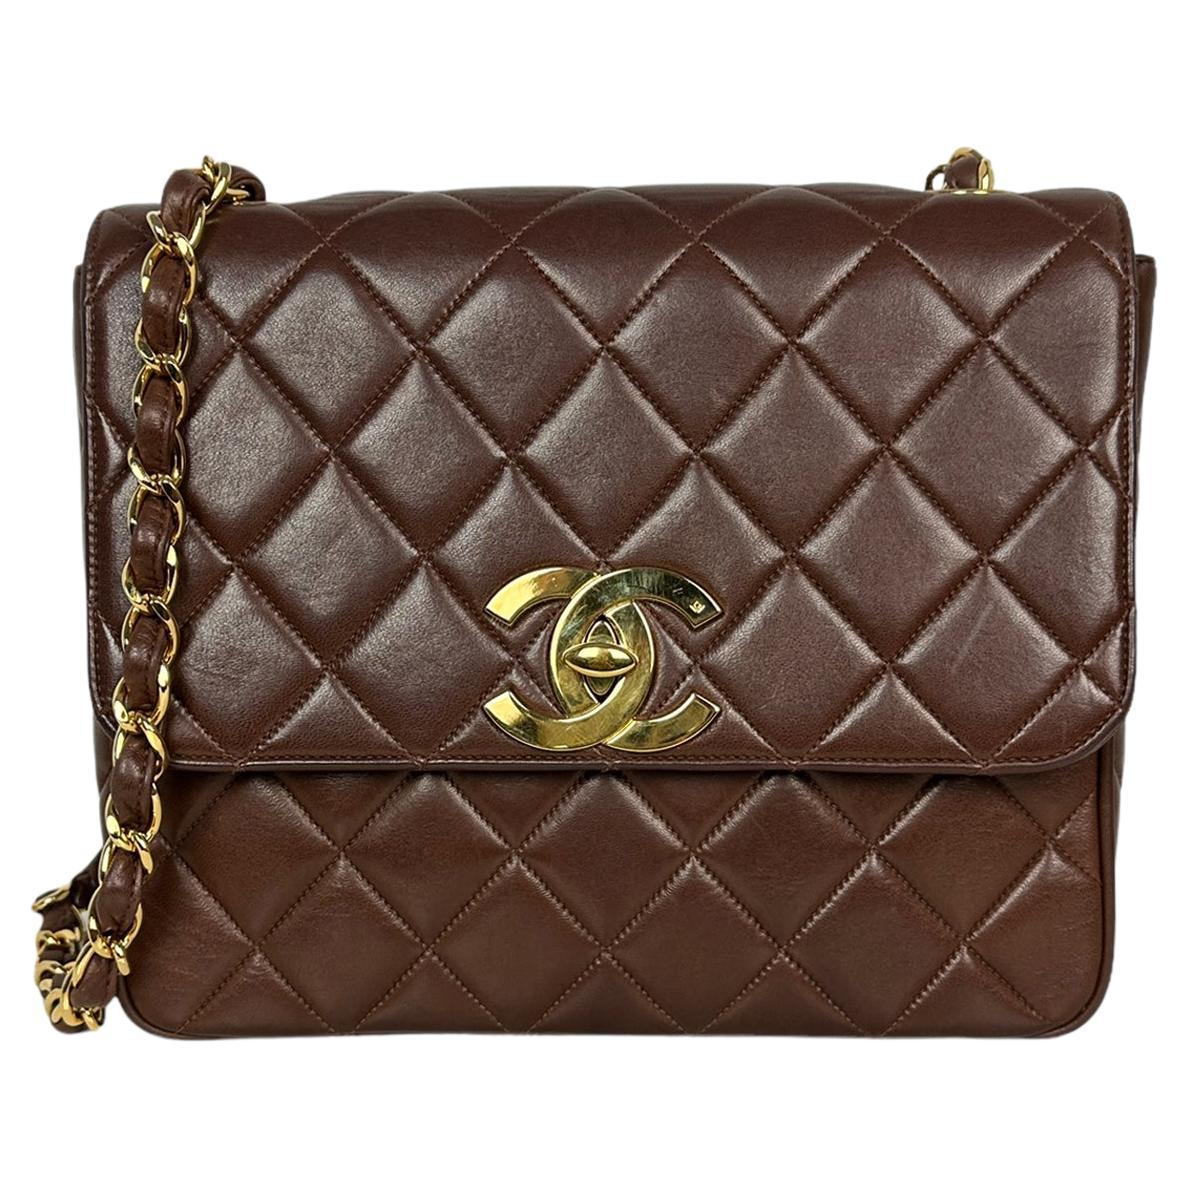 Chanel 1990s Brown Lambskin Leather CC Maxi Flap Messenger Bag